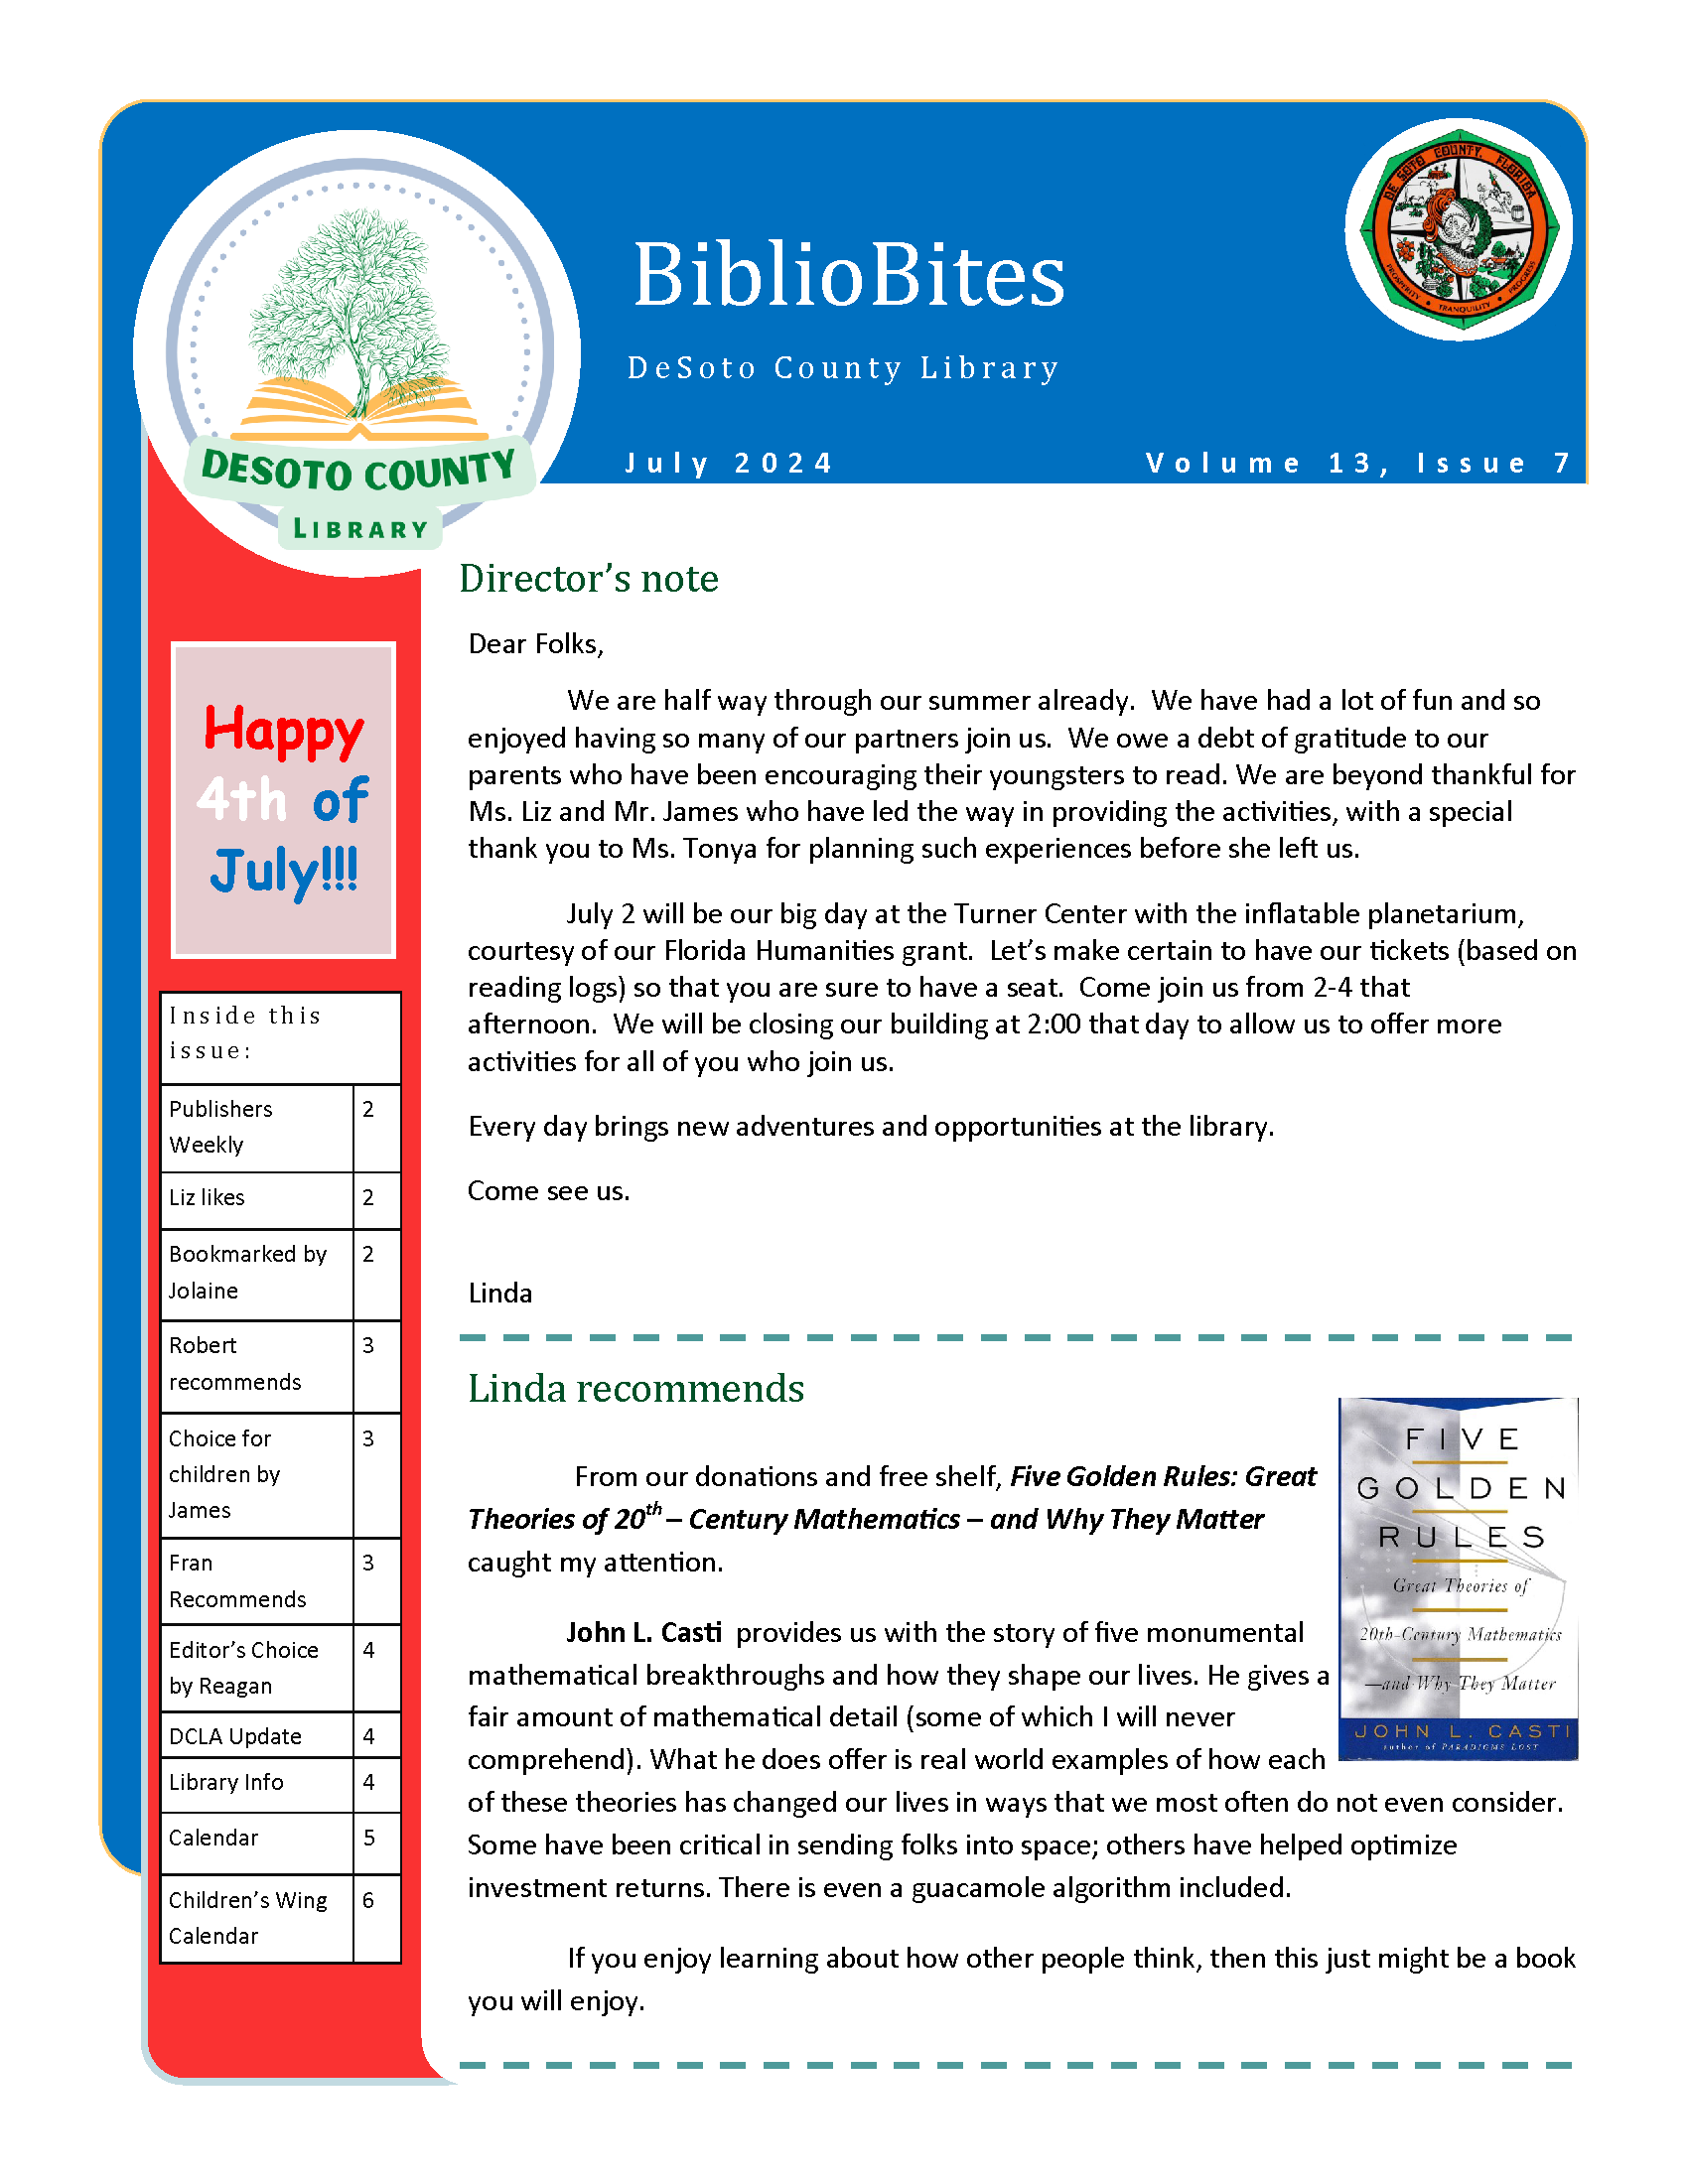 This is the image of page 1 of the newsletter. Full version of the newsletter available by clicking this image. Full newsletter is in PDF format.